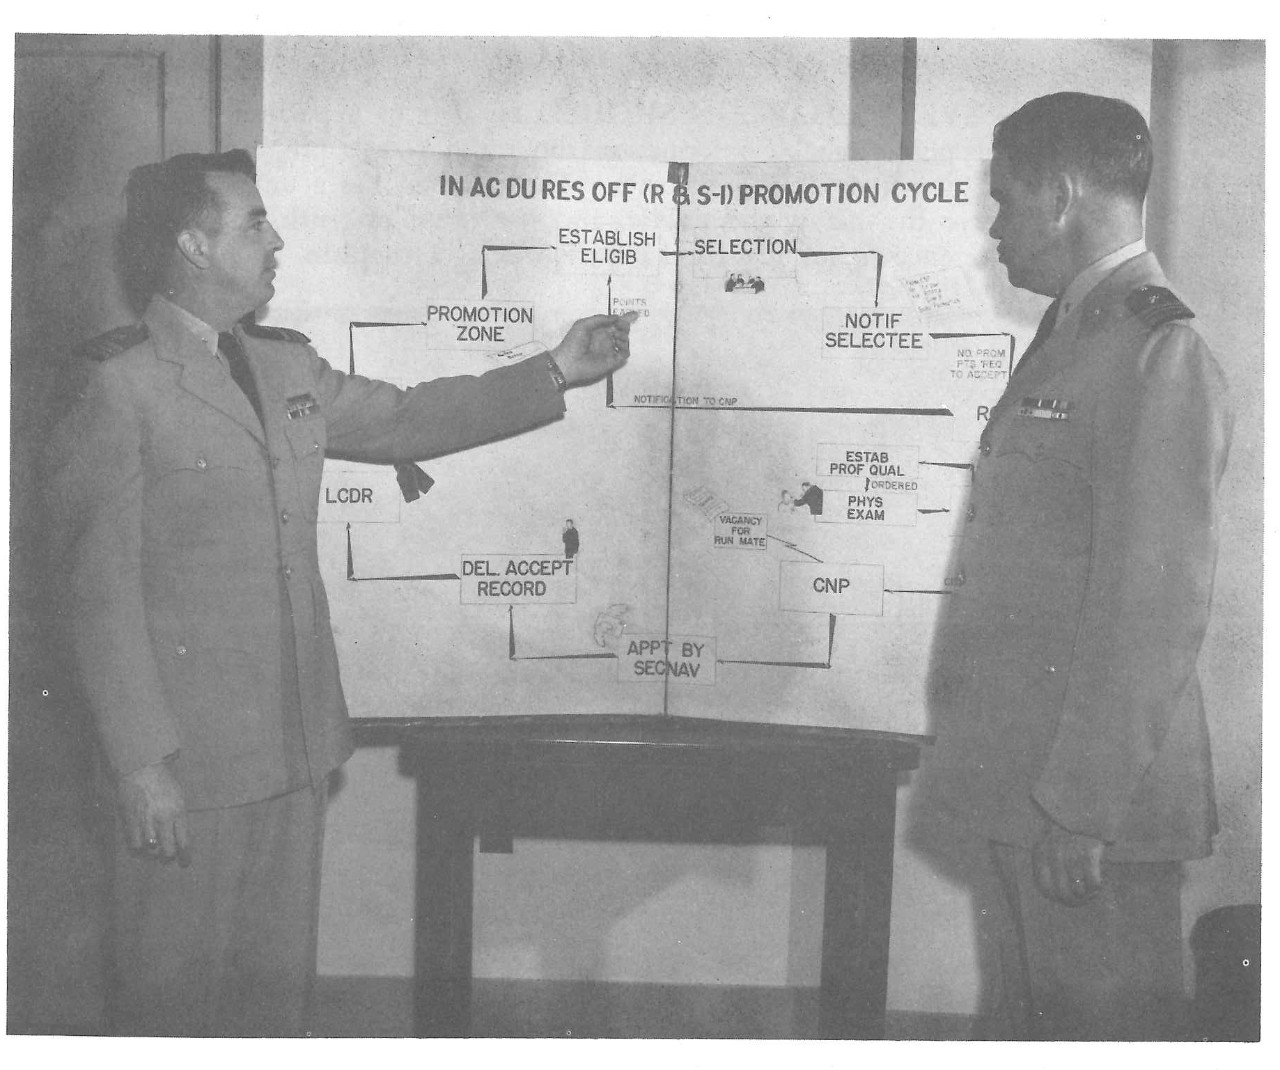 Two men standing in front of a promotion chart